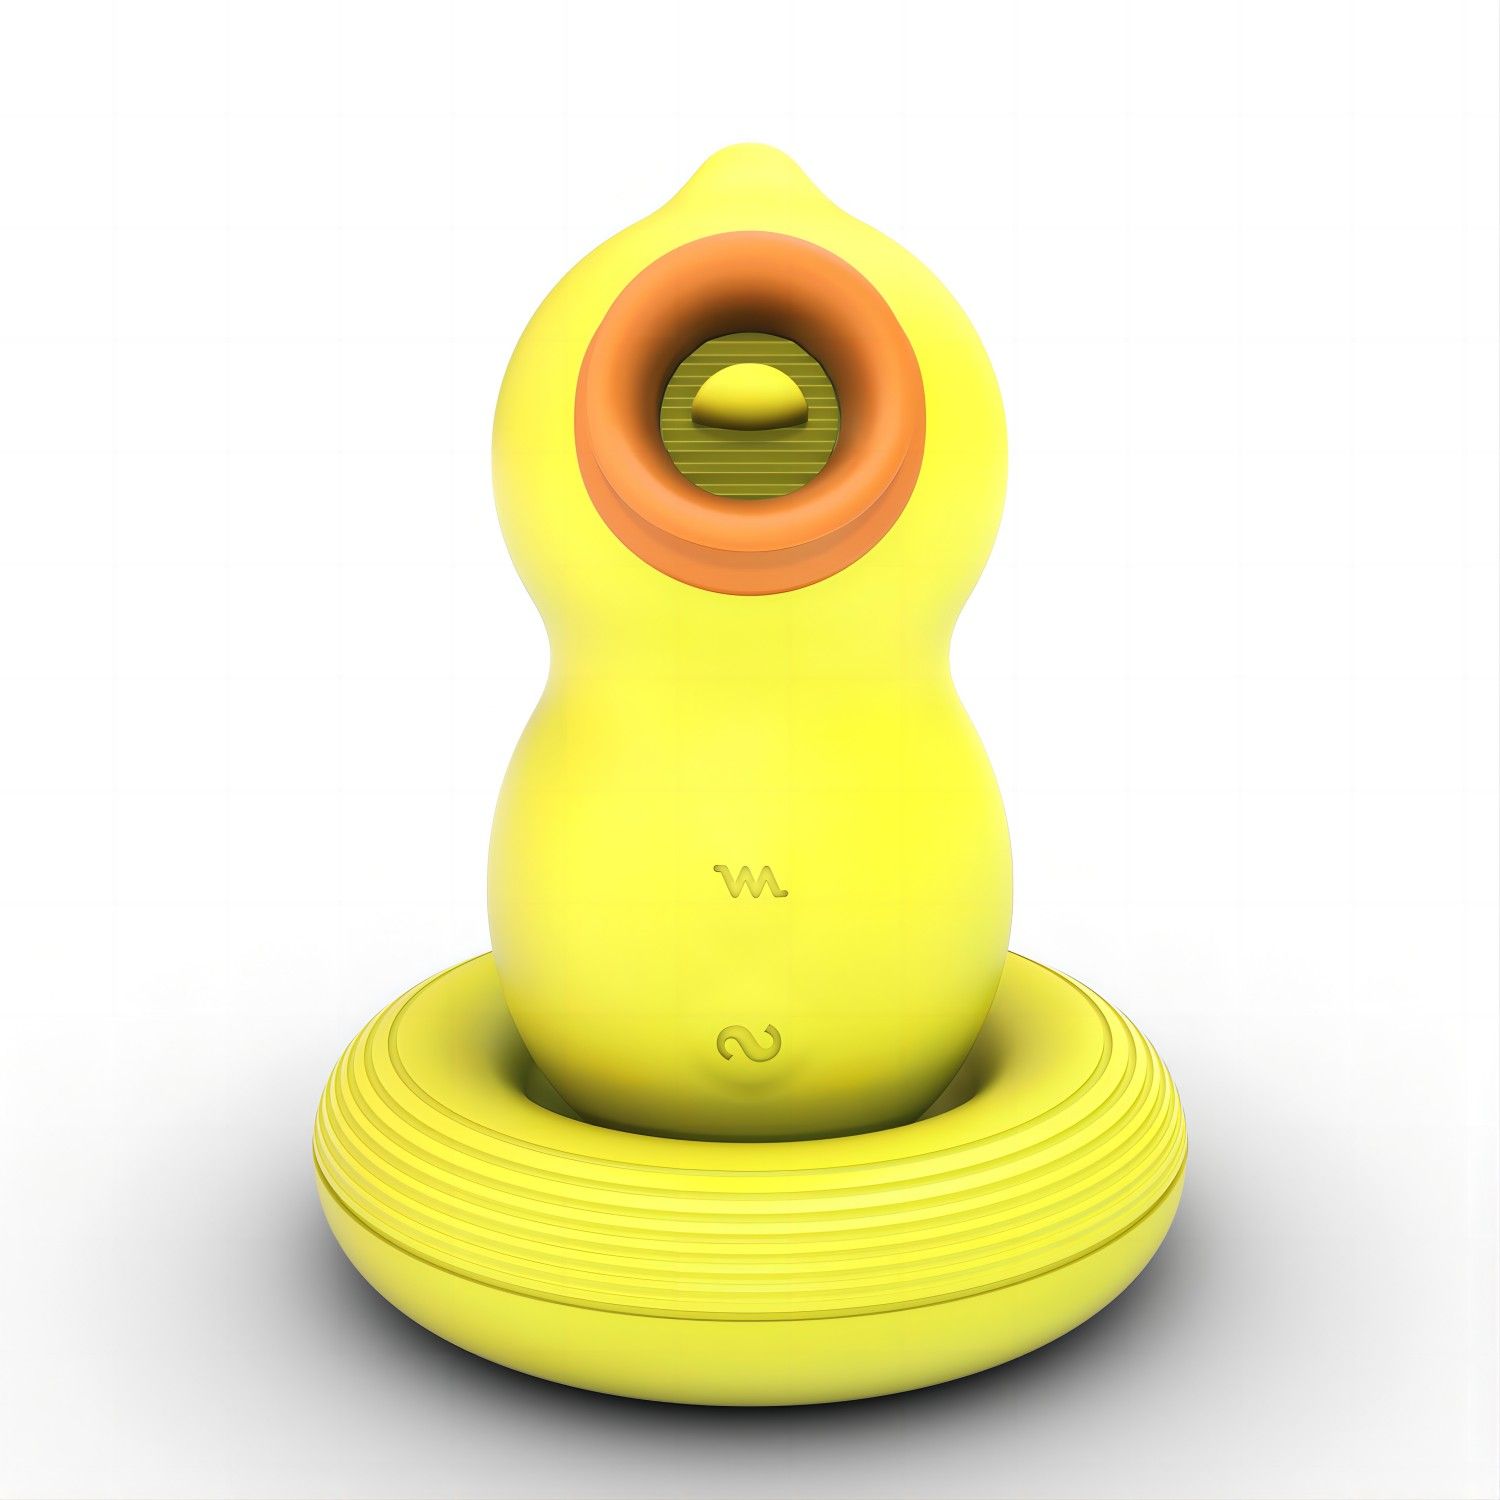 Tracy's Dog - Mr Duckie Clitoral Sucking Vibrator - EasyToys